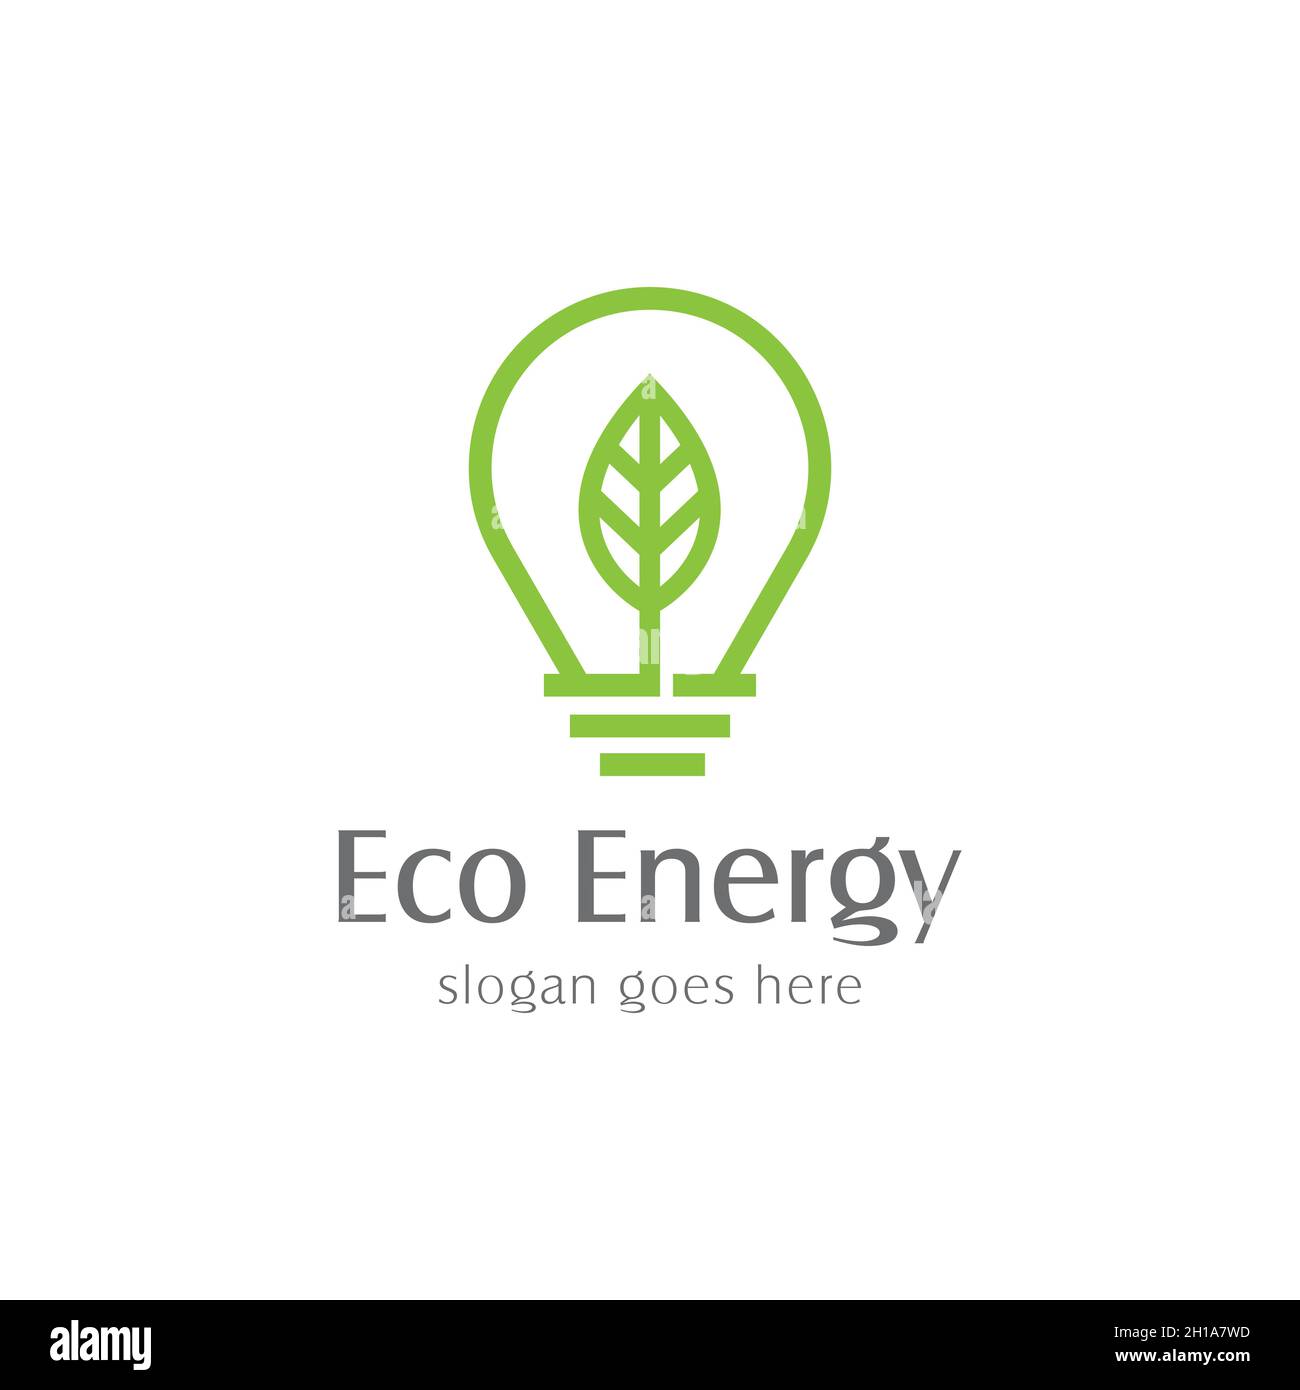 Ecology light bulb logo with simple leaf sign. isolated on white background. Stock Vector